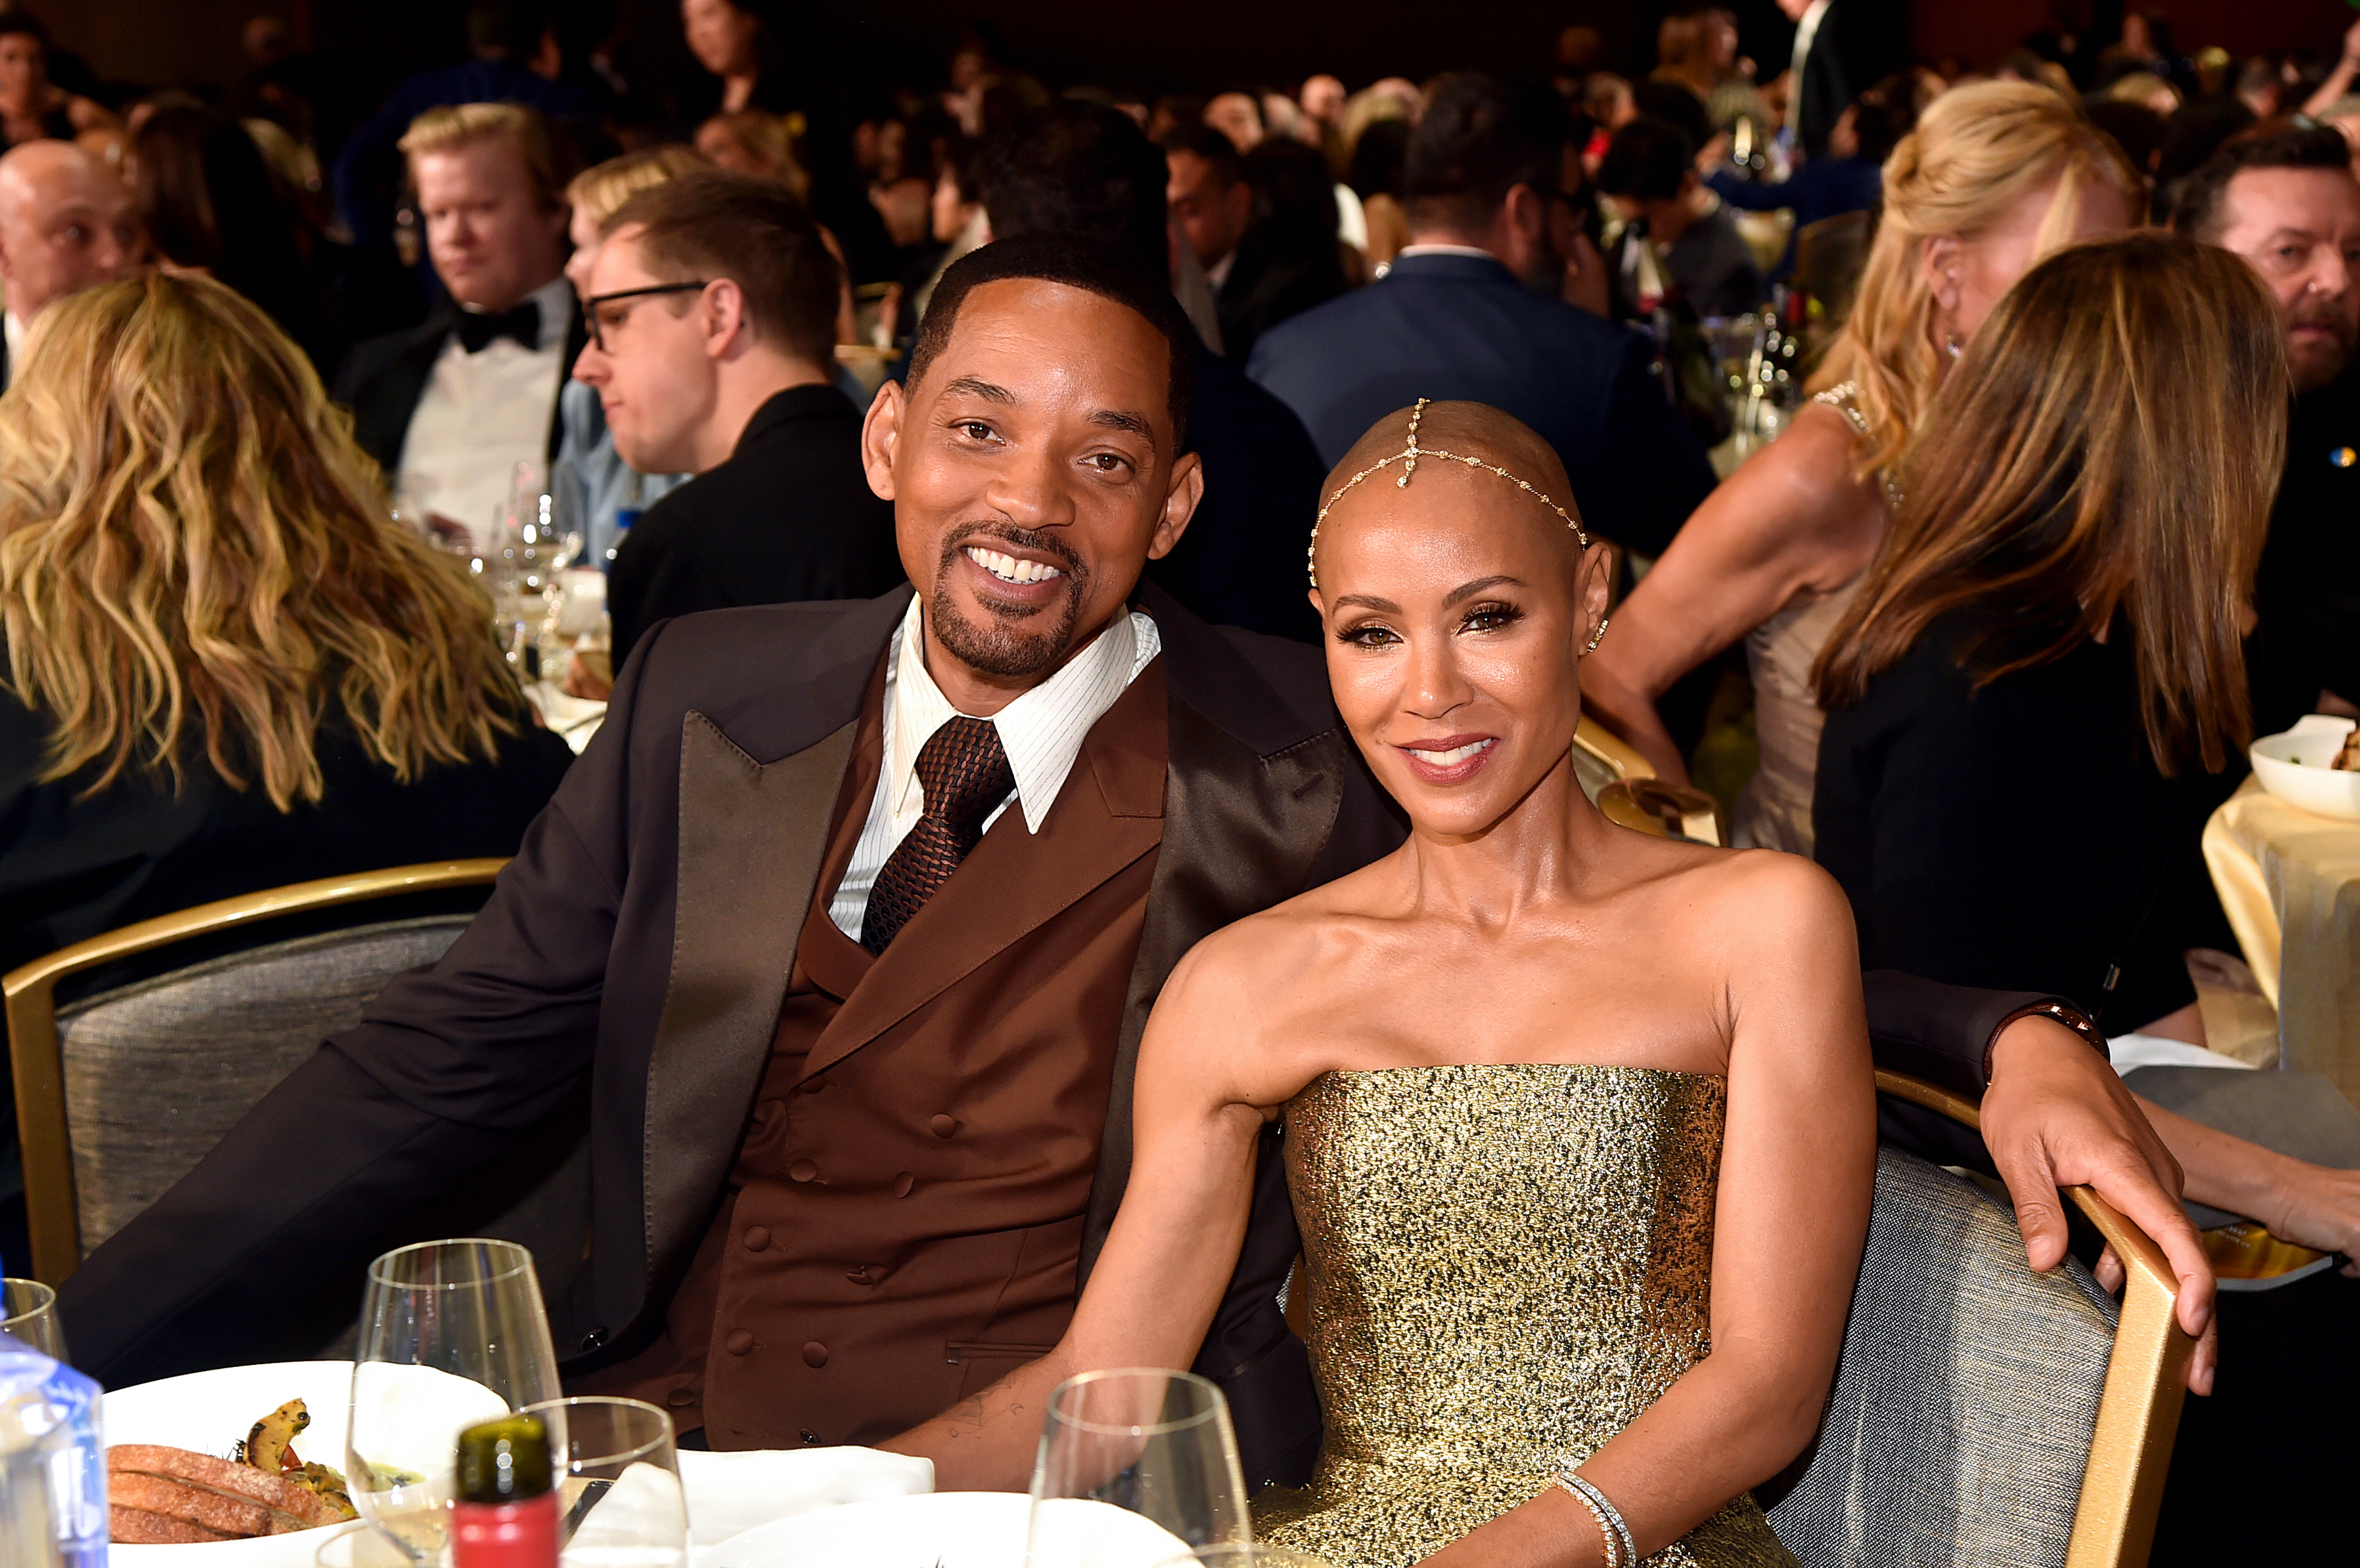 Close-up of Will and Jada smiling and sitting together at a table during a media event